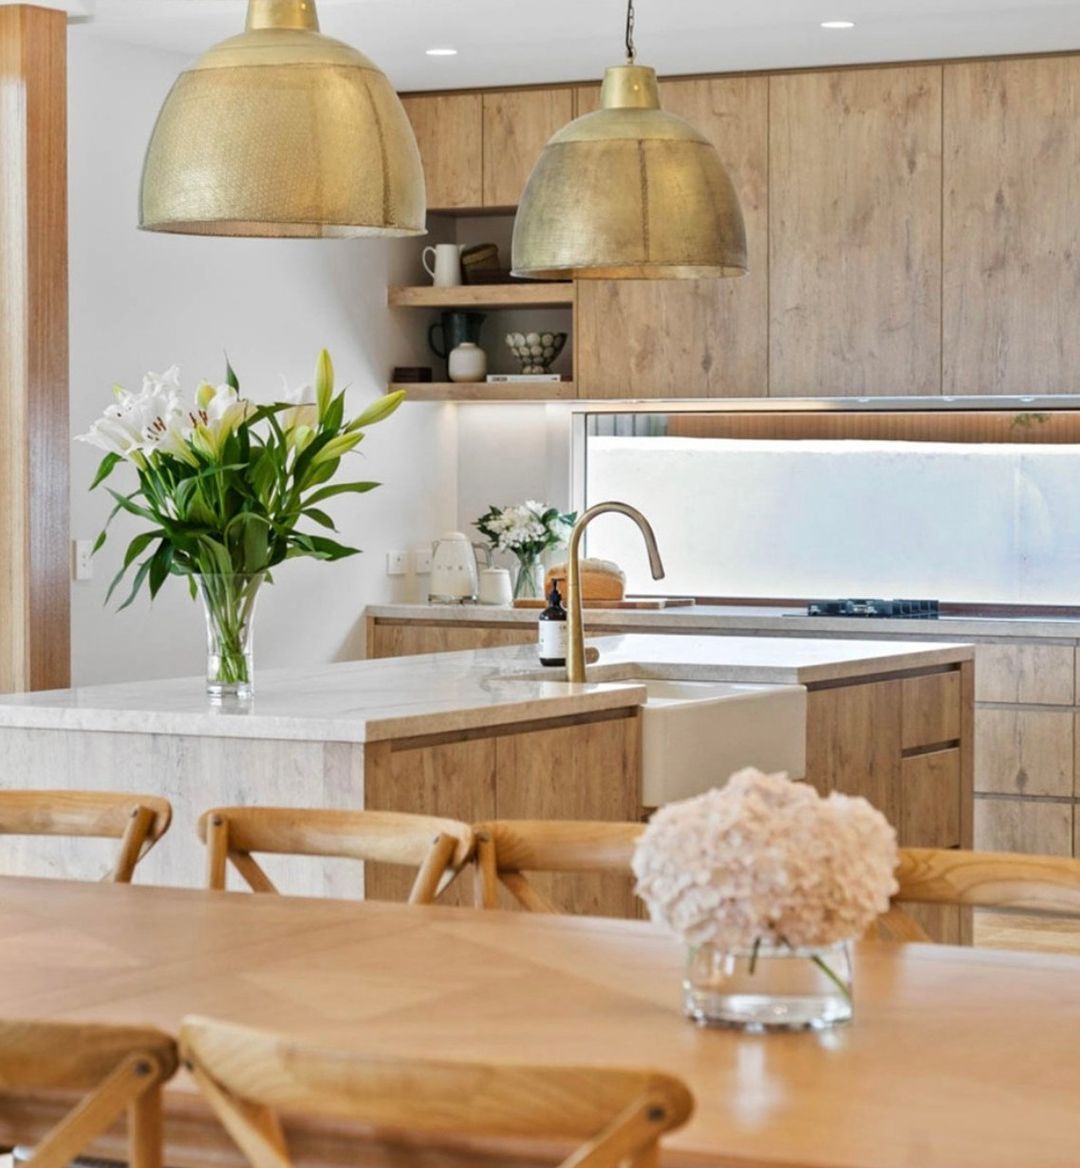 Luxury wooden kitchen with gilded lights and wooden furniture